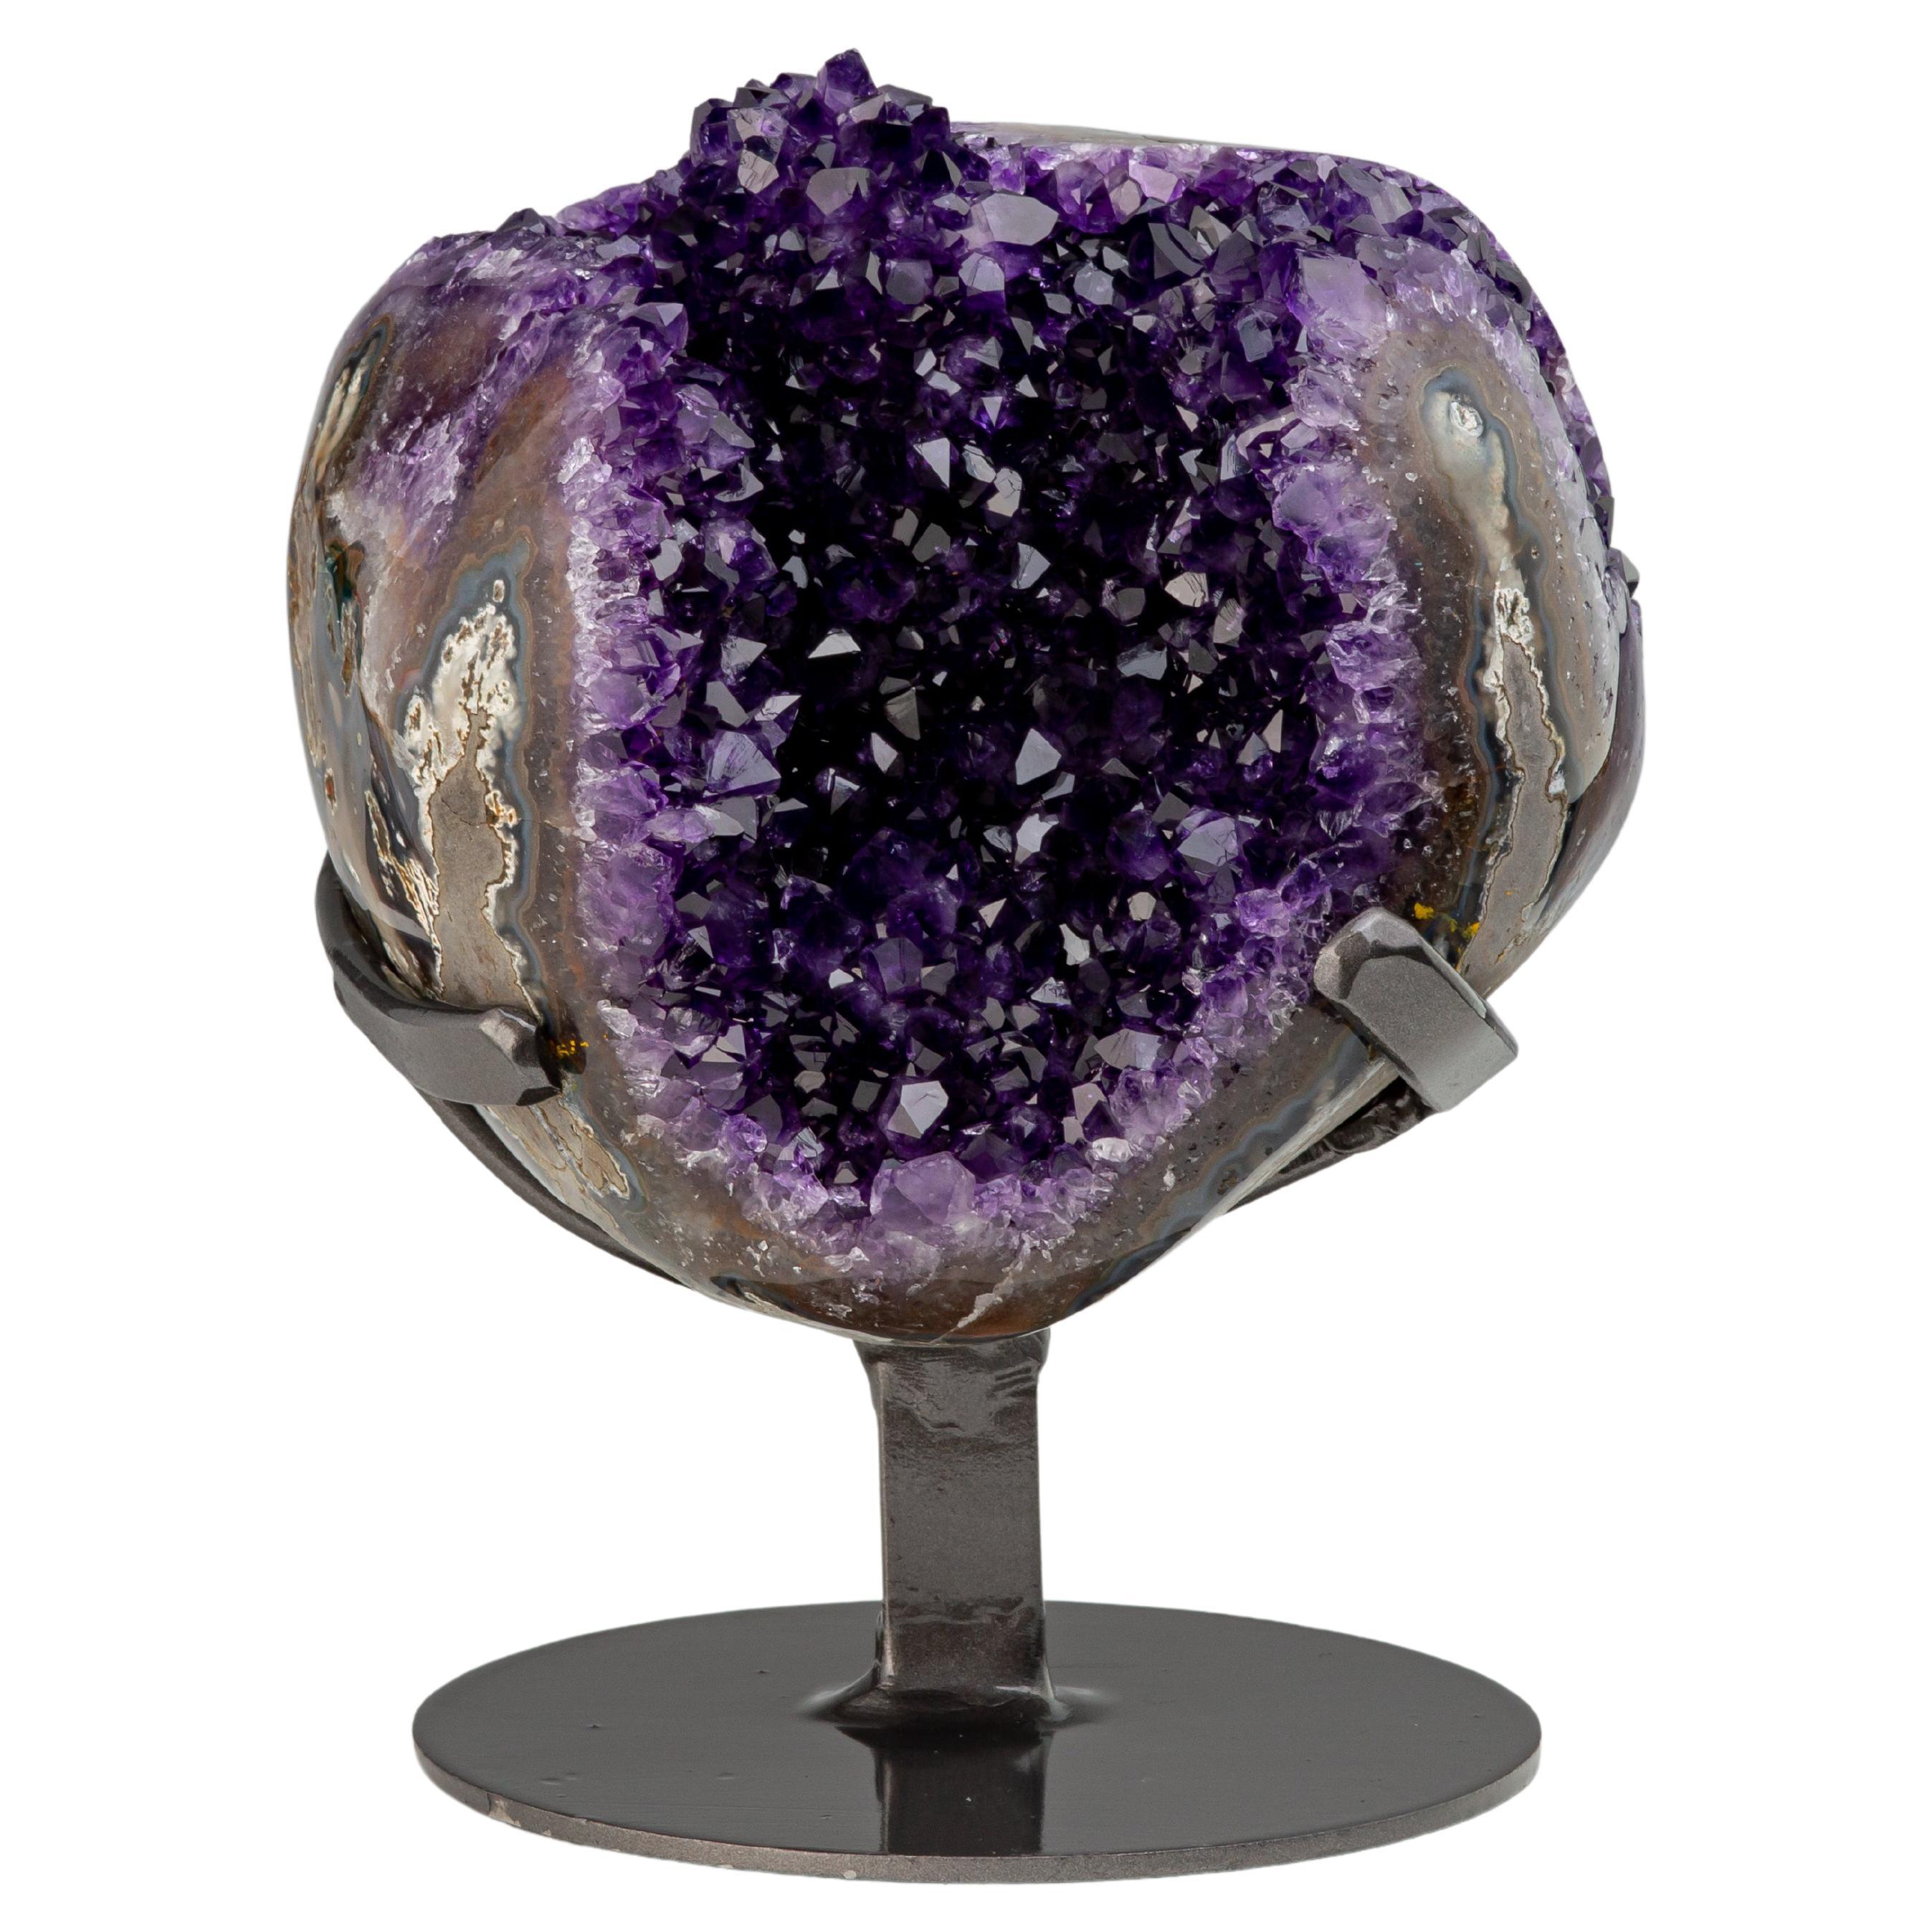 Geode with deep purple amethyst crystals, a central stalactite and agate borders